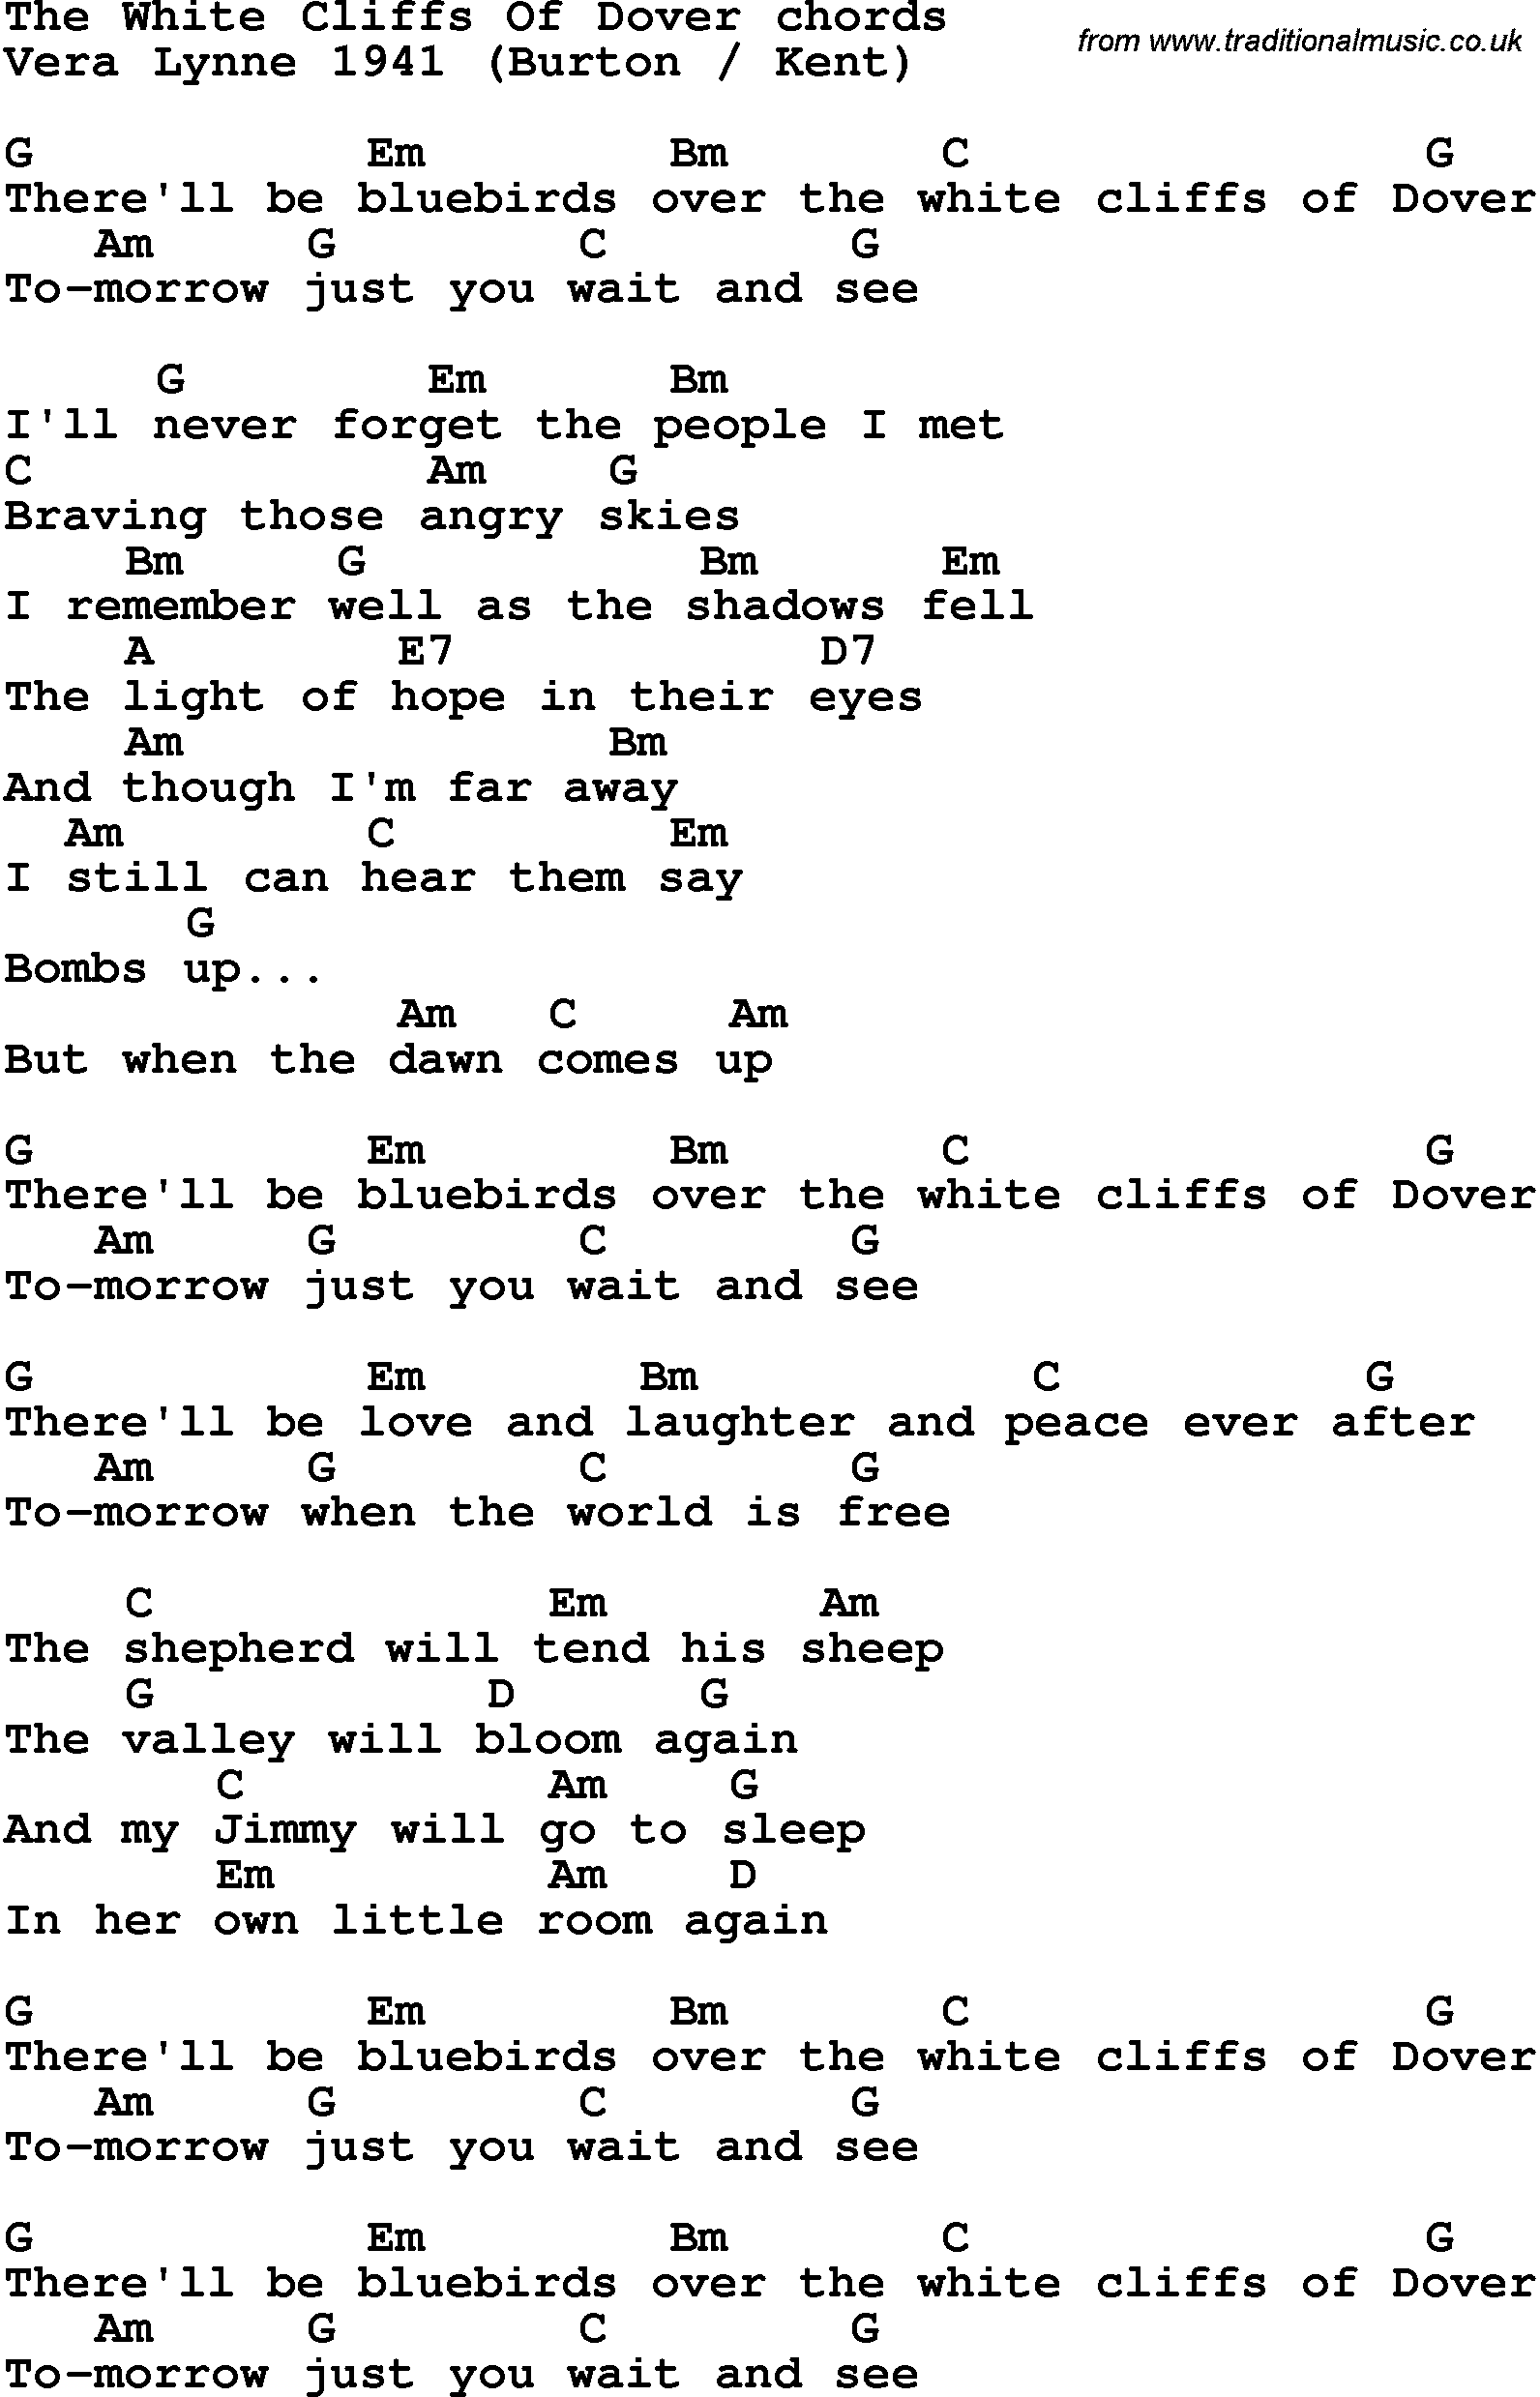 Song Lyrics with guitar chords for The White Cliffs Of Dover